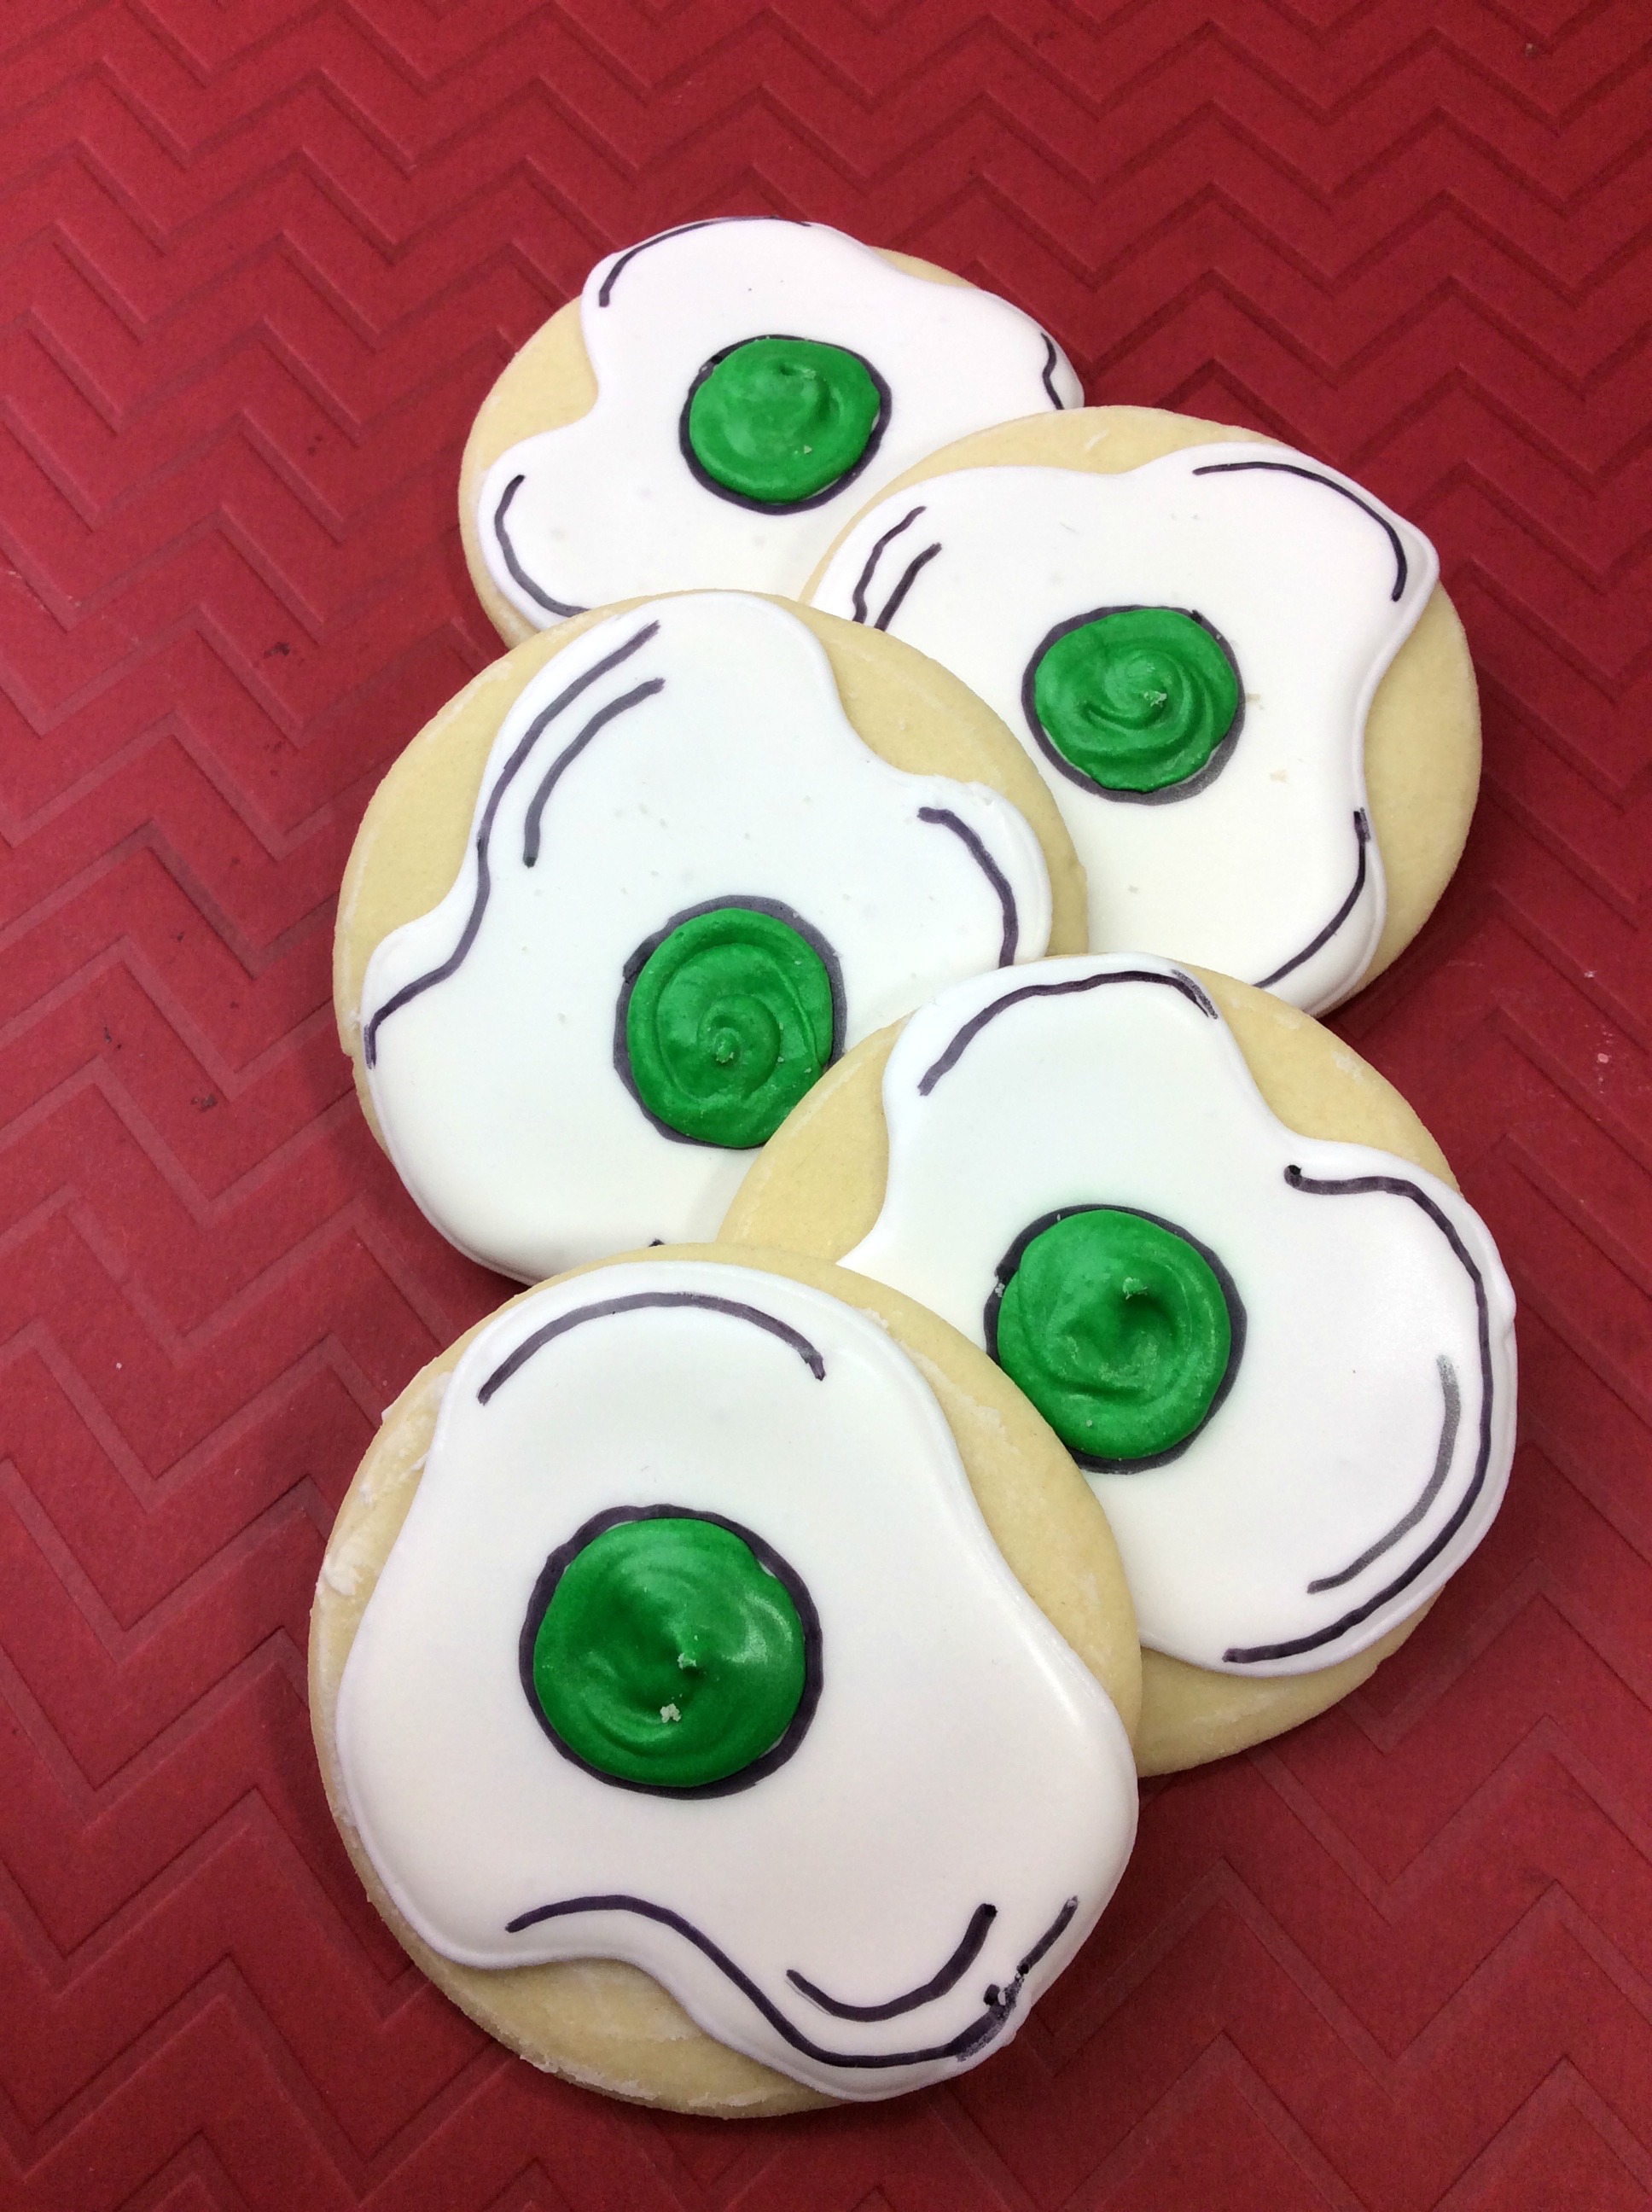 I do not like green eggs and ham.... But what if those green eggs were delicious cookies? These green eggs cookies are perfect for Dr. Seuss's birthday